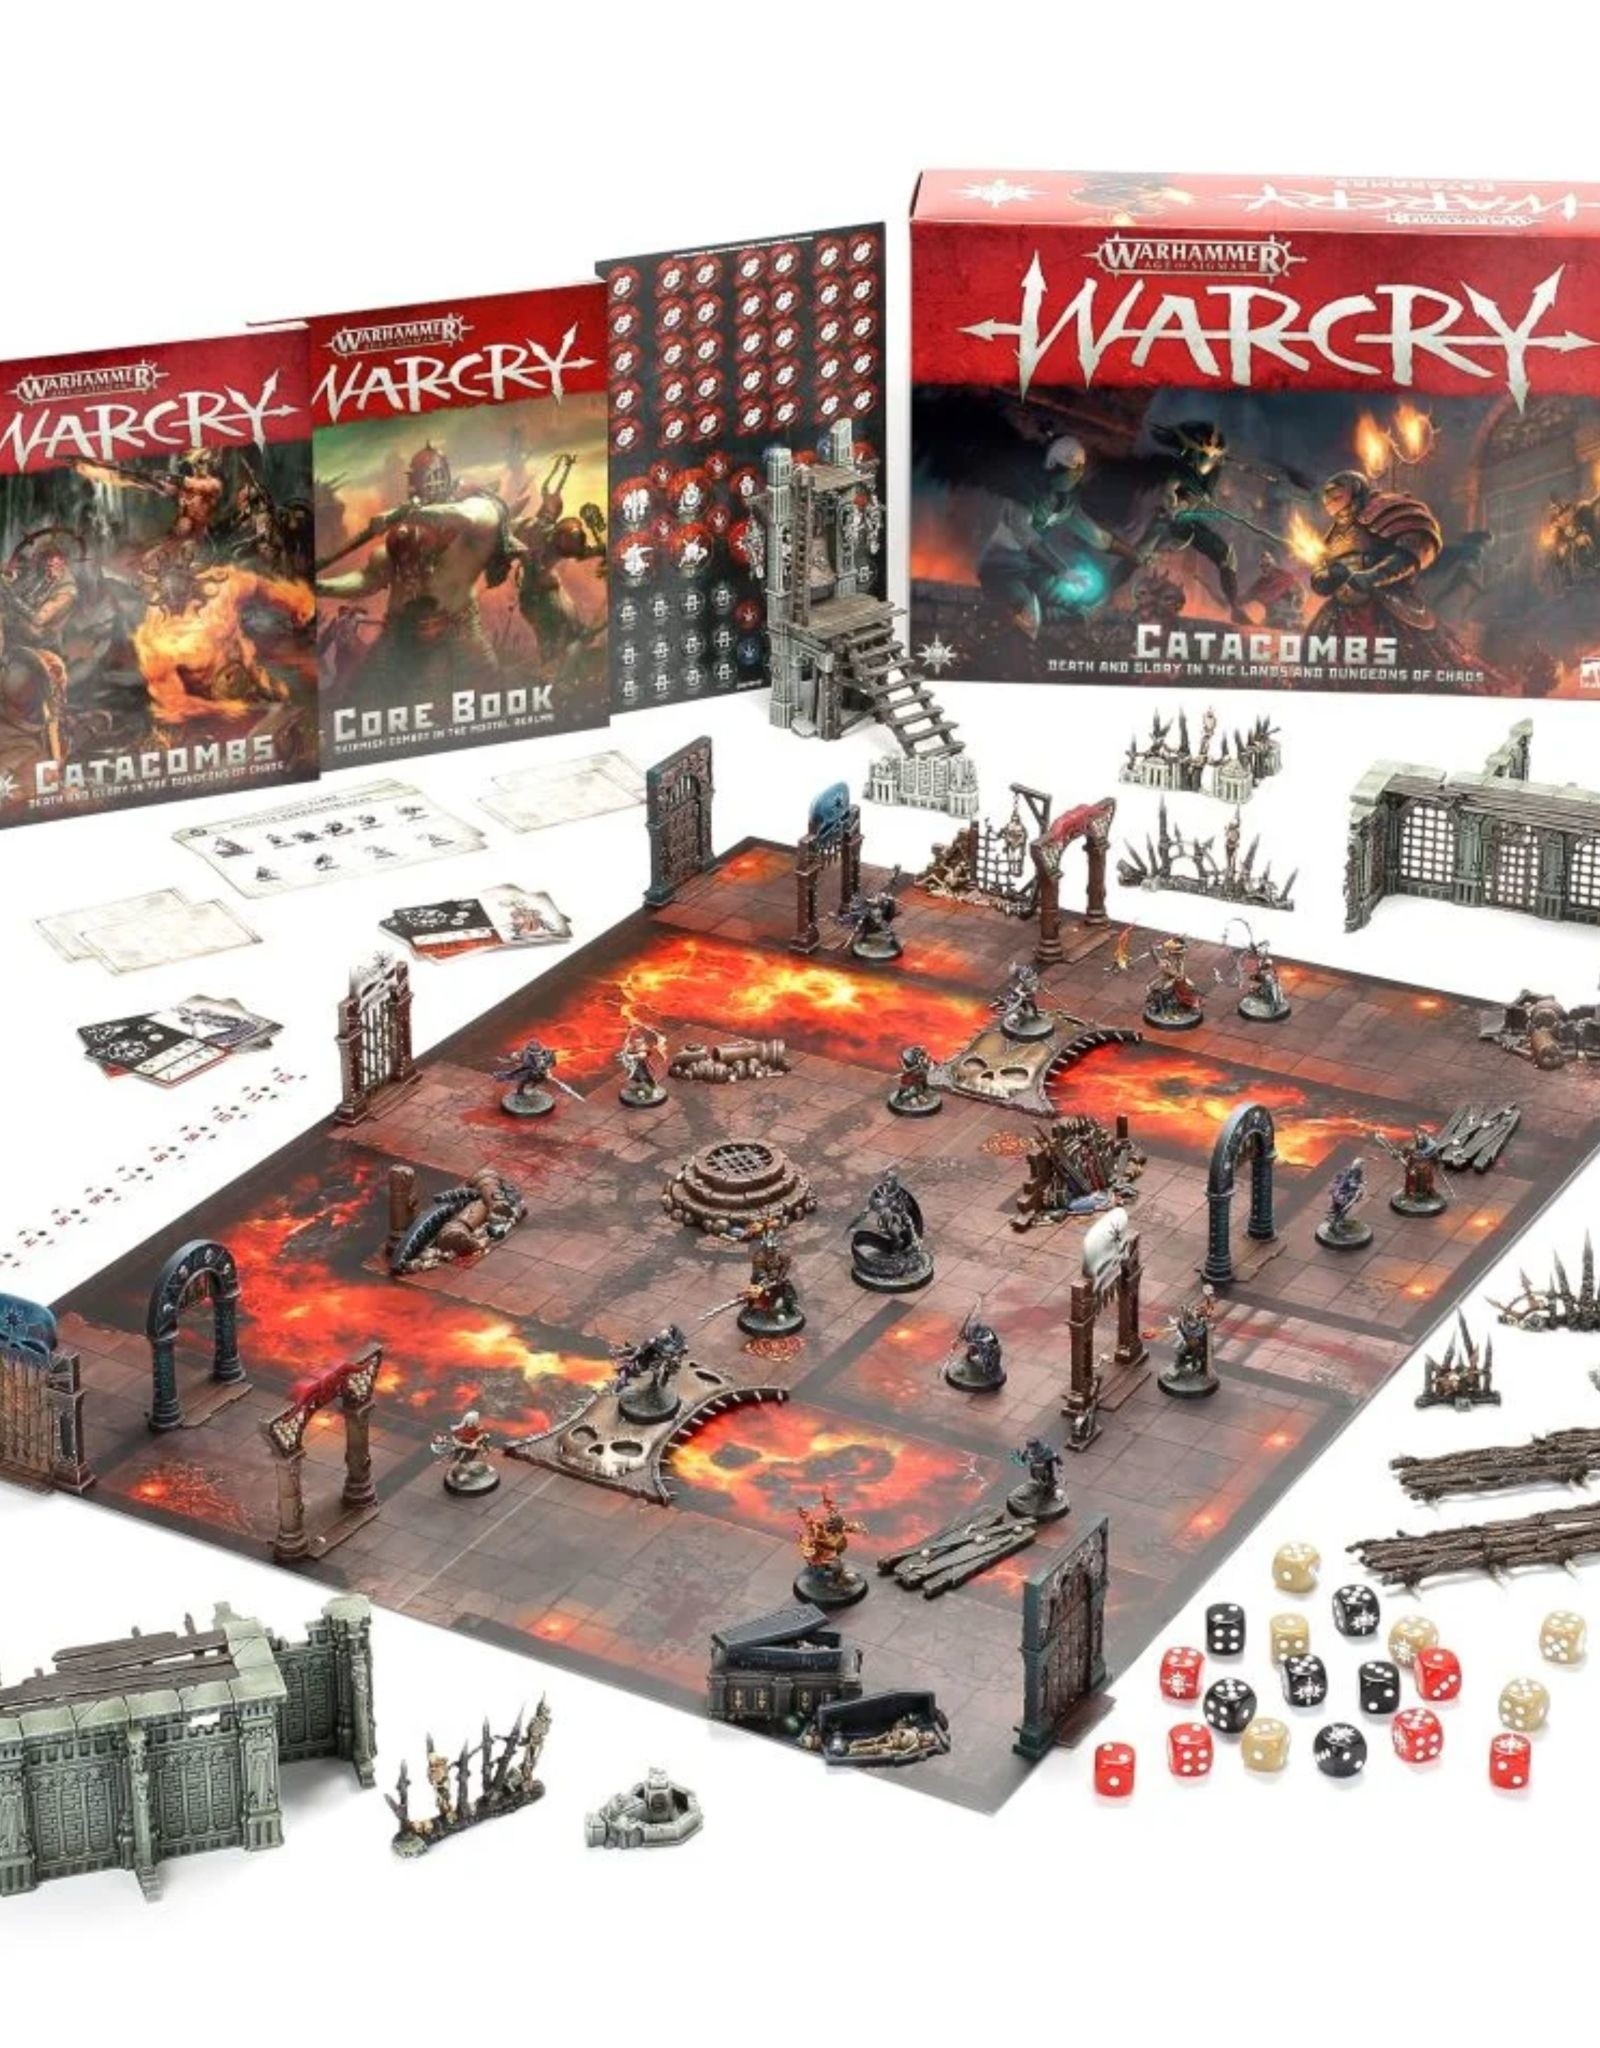 Warcry Warcry: Catacombs